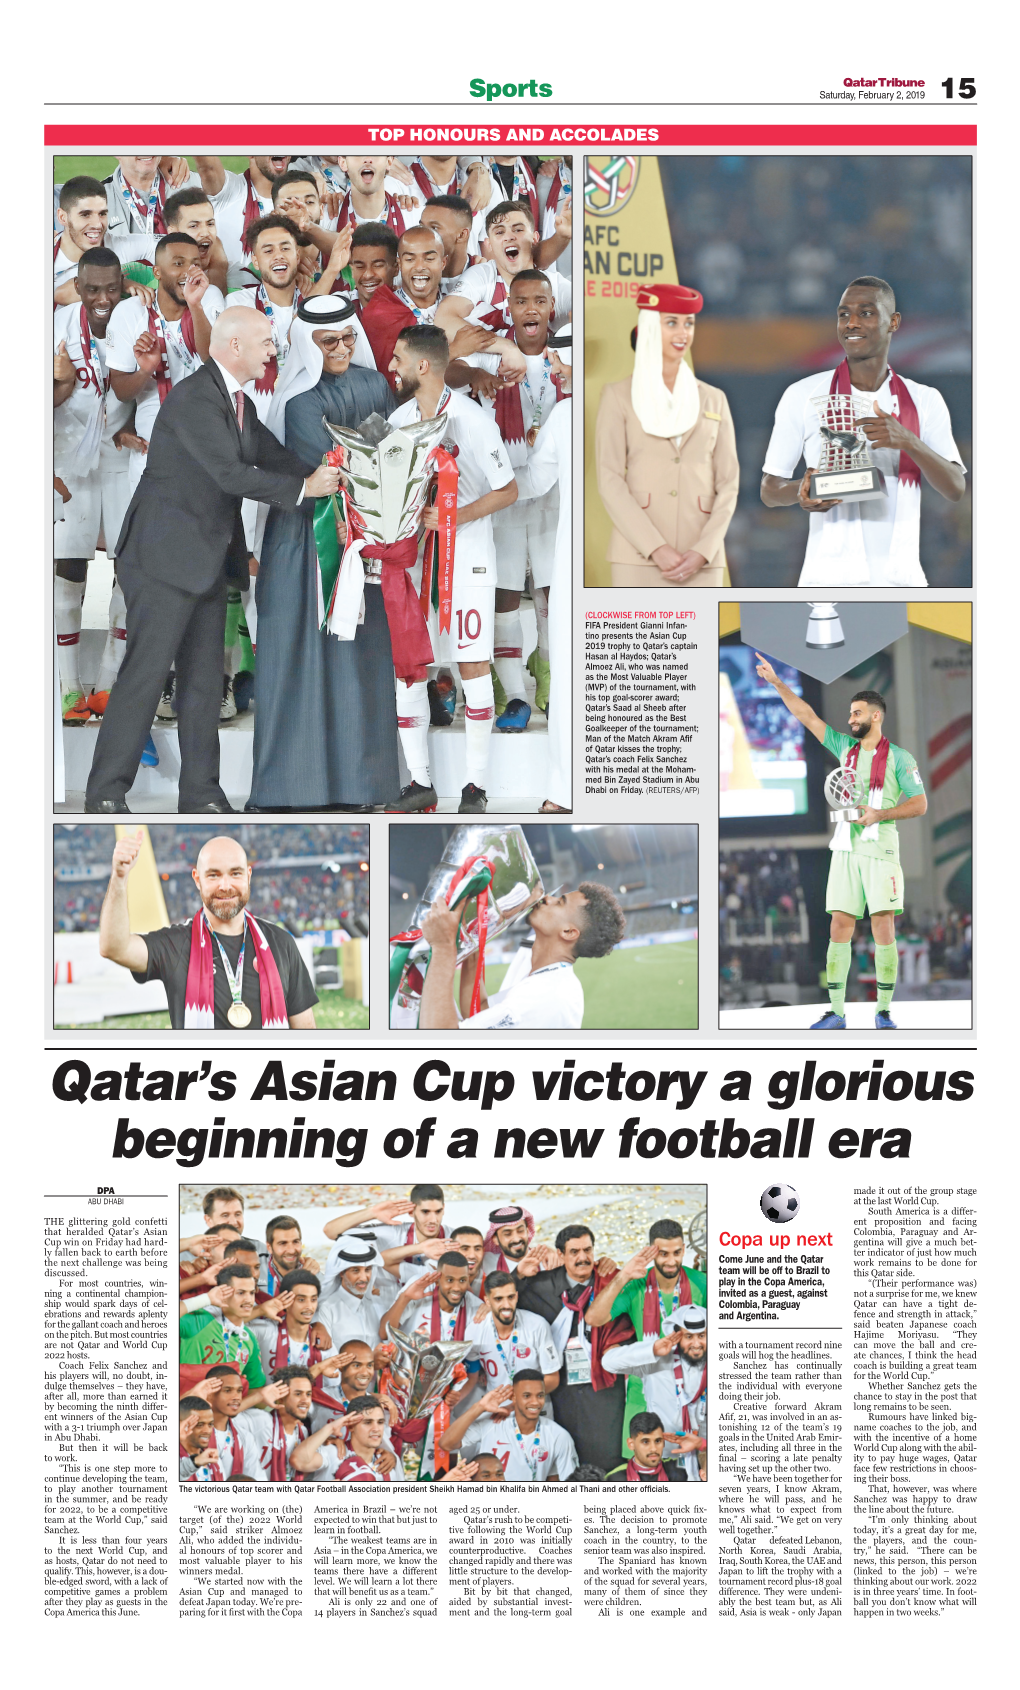 Qatar's Asian Cup Victory a Glorious Beginning of a New Football